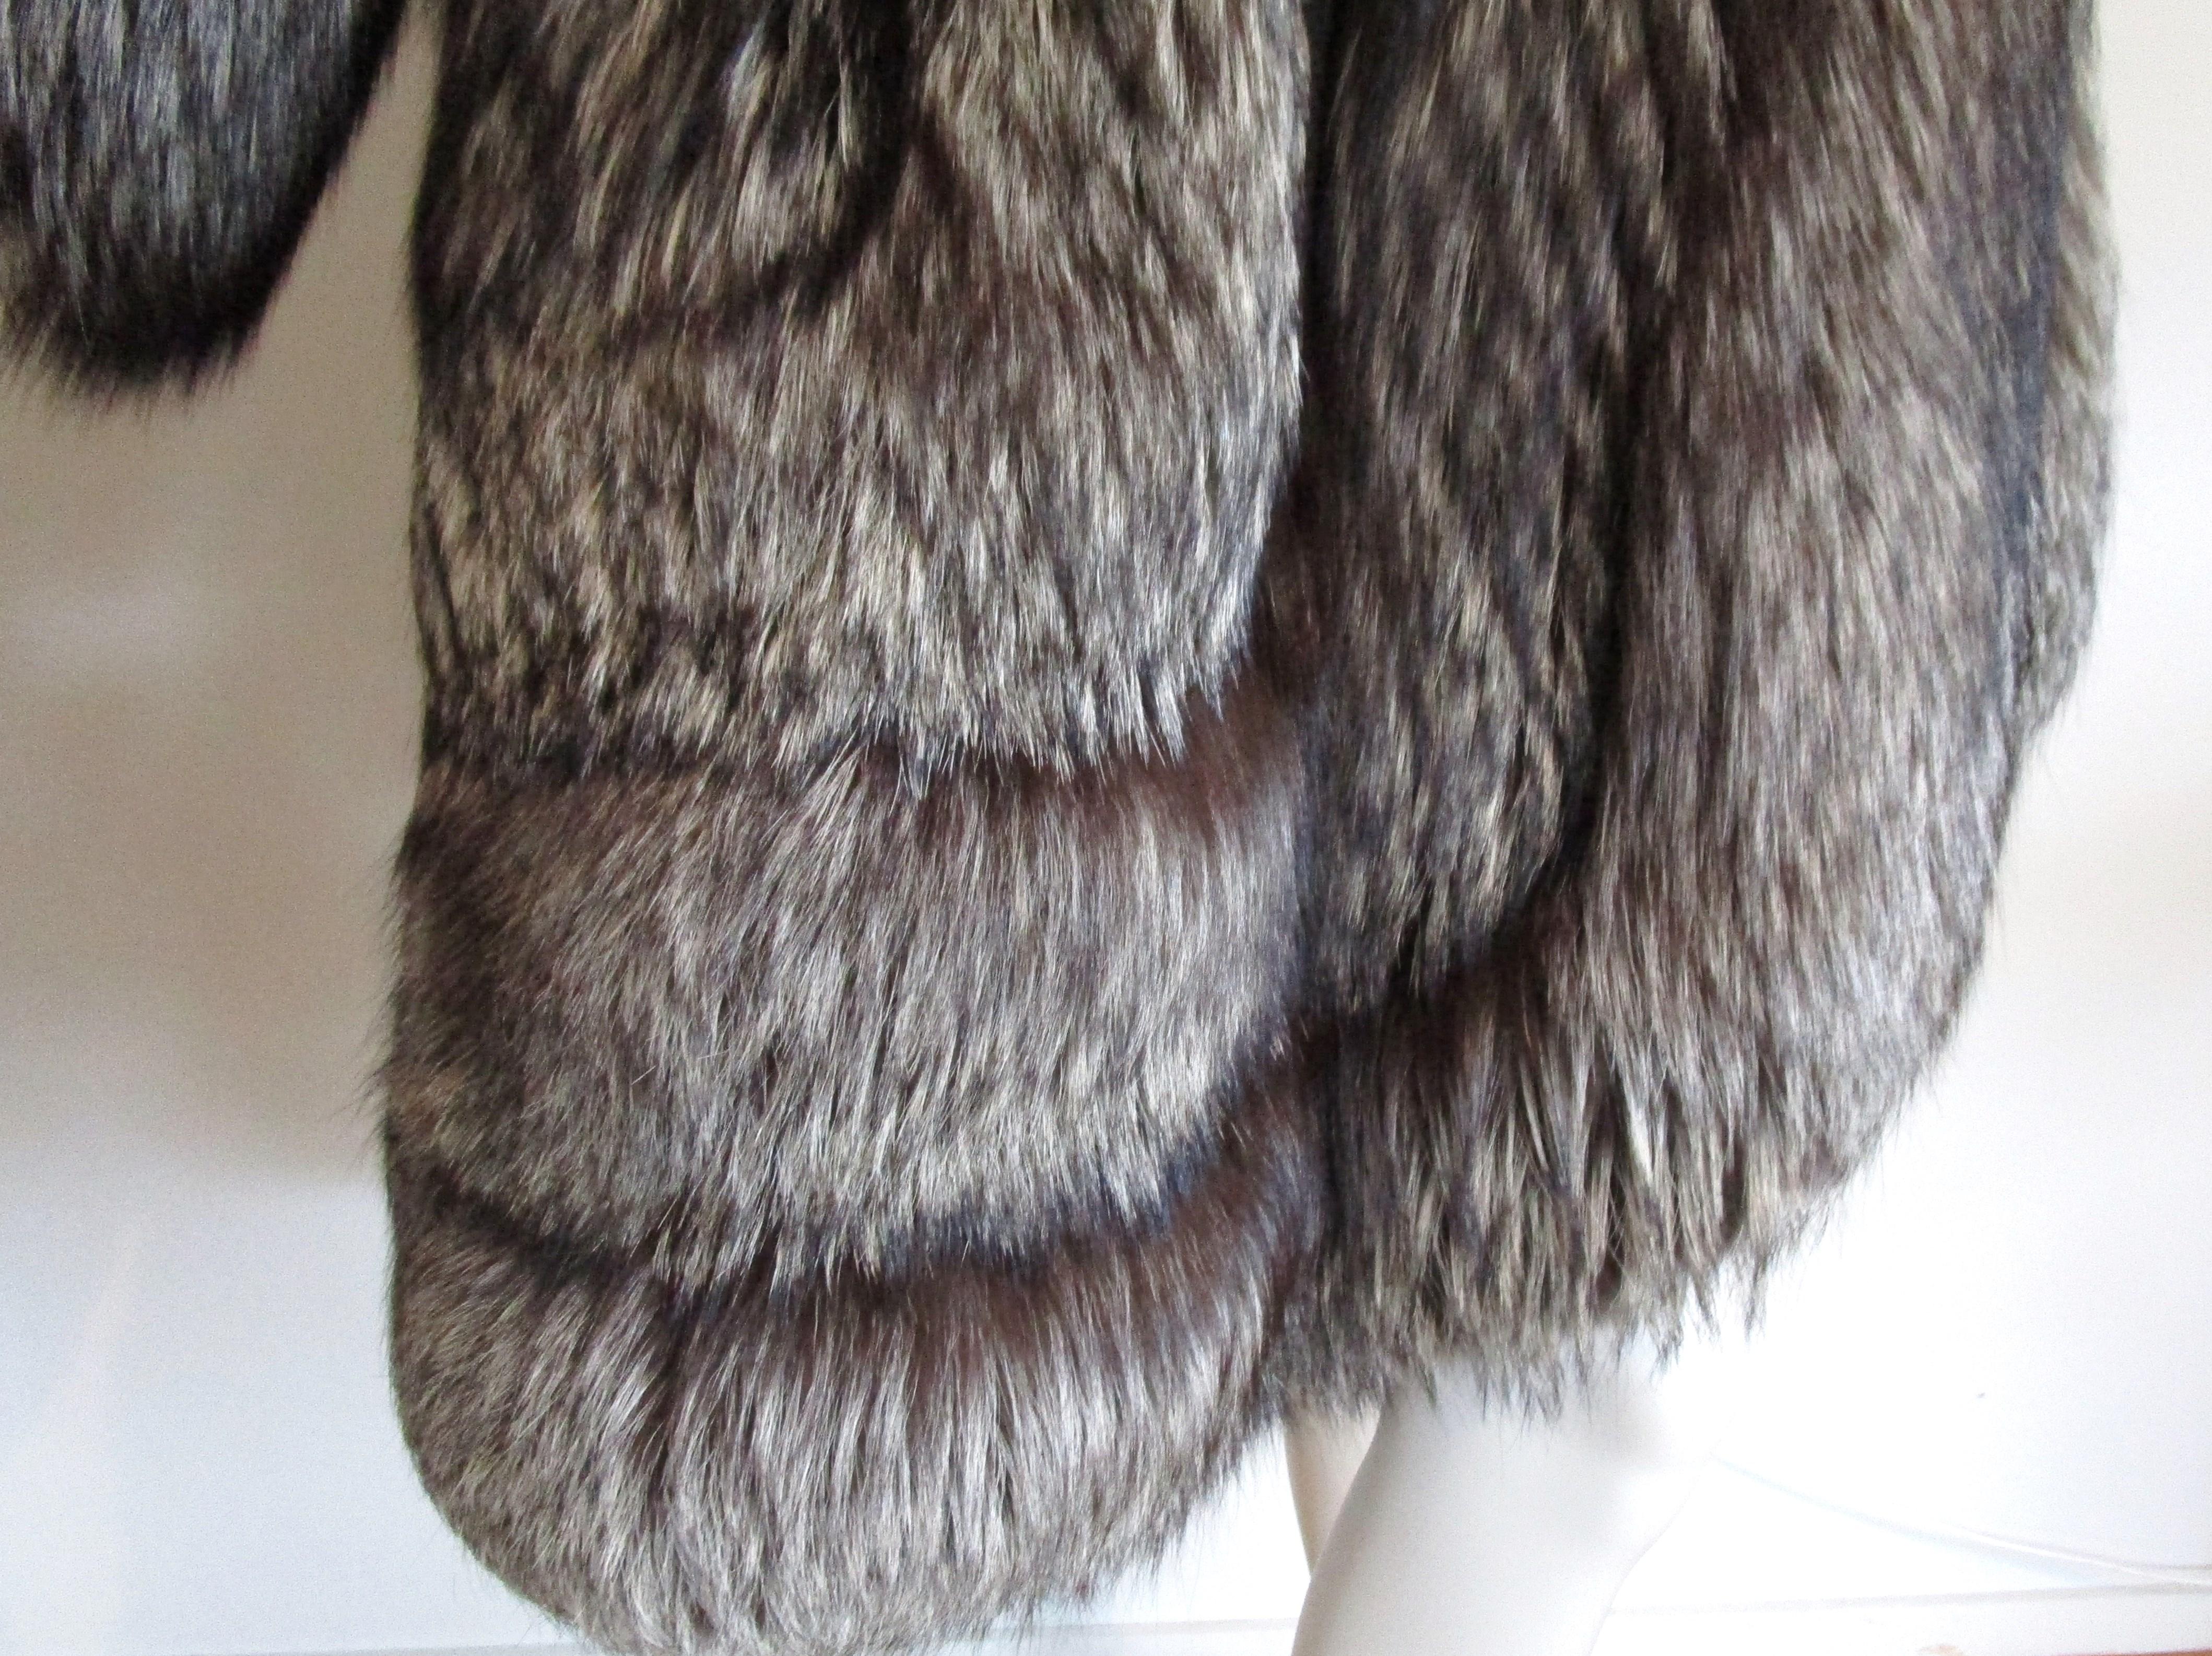  Fox Swing Coat Over sized Large Unisex - Silver Tipped 14-16 Scalloped Detail For Sale 2